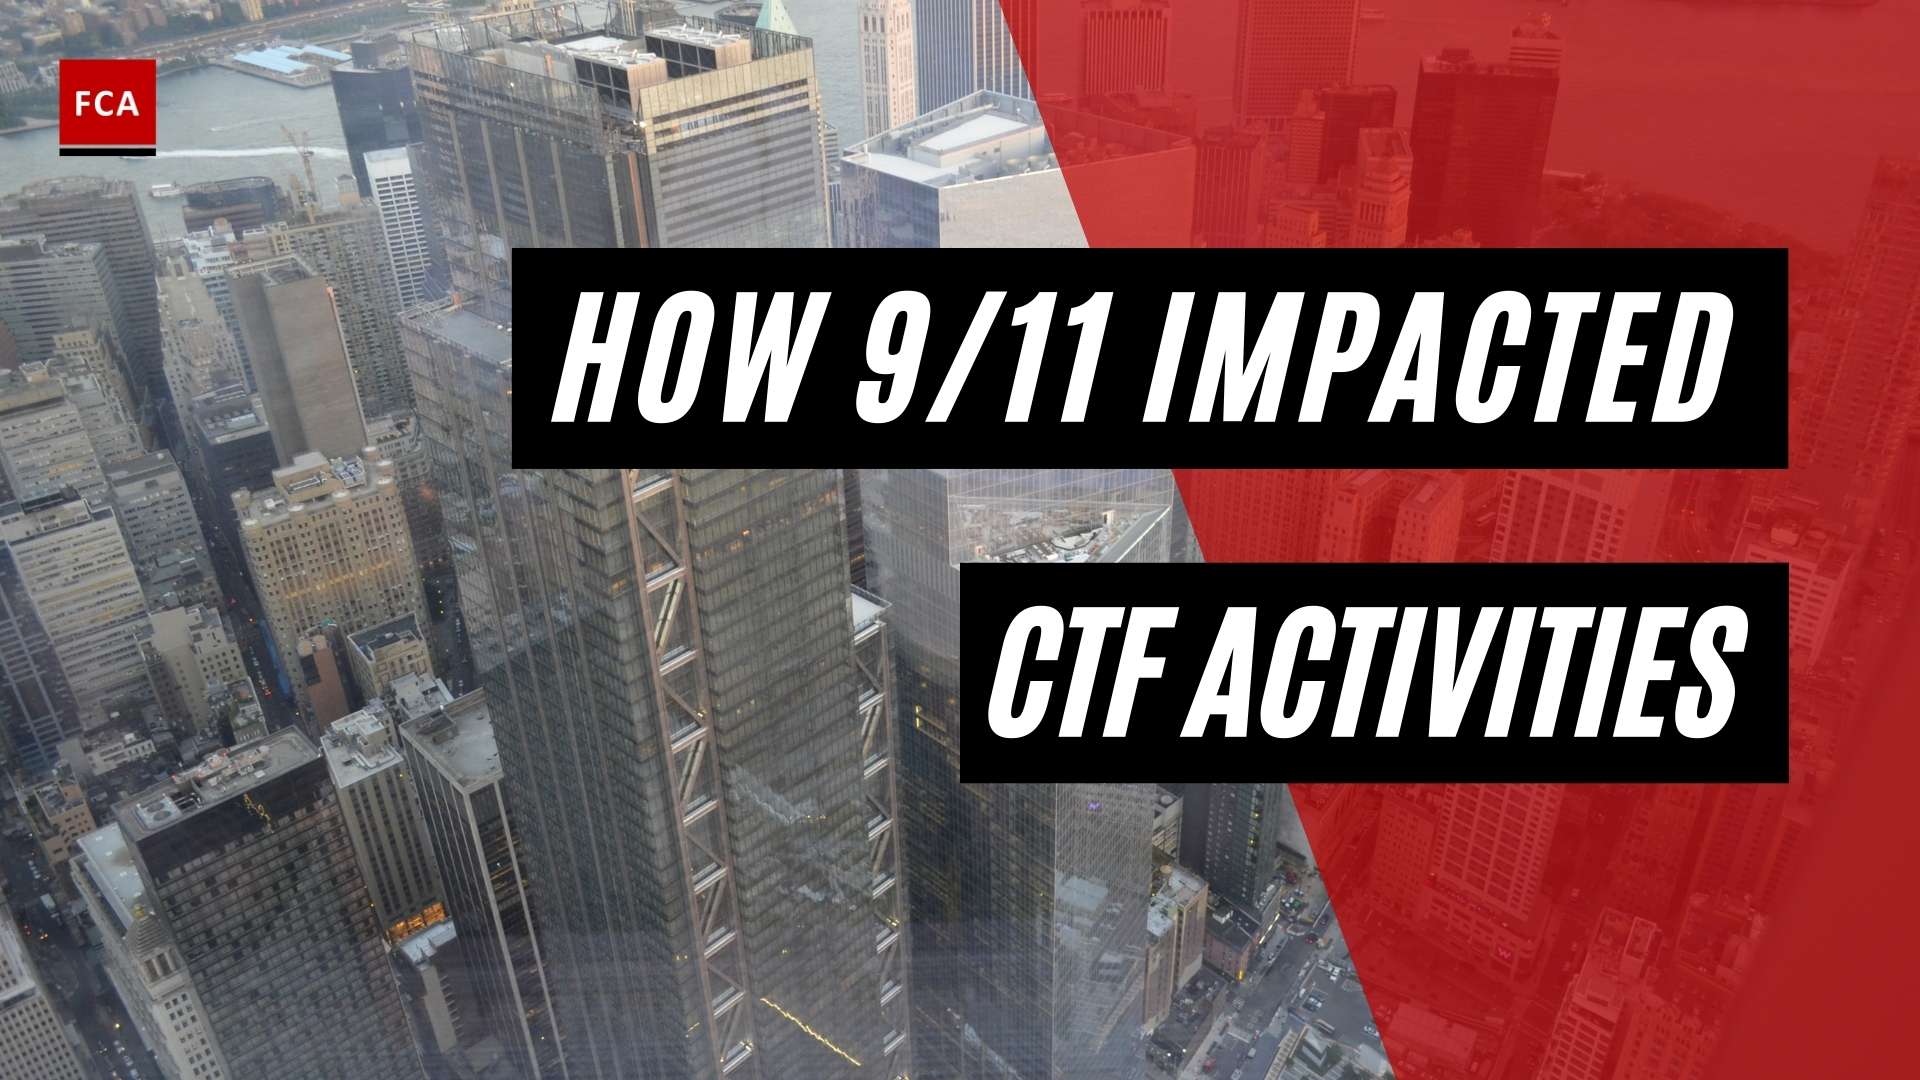 How 9/11 Impacted Ctf Activities - Featured Image